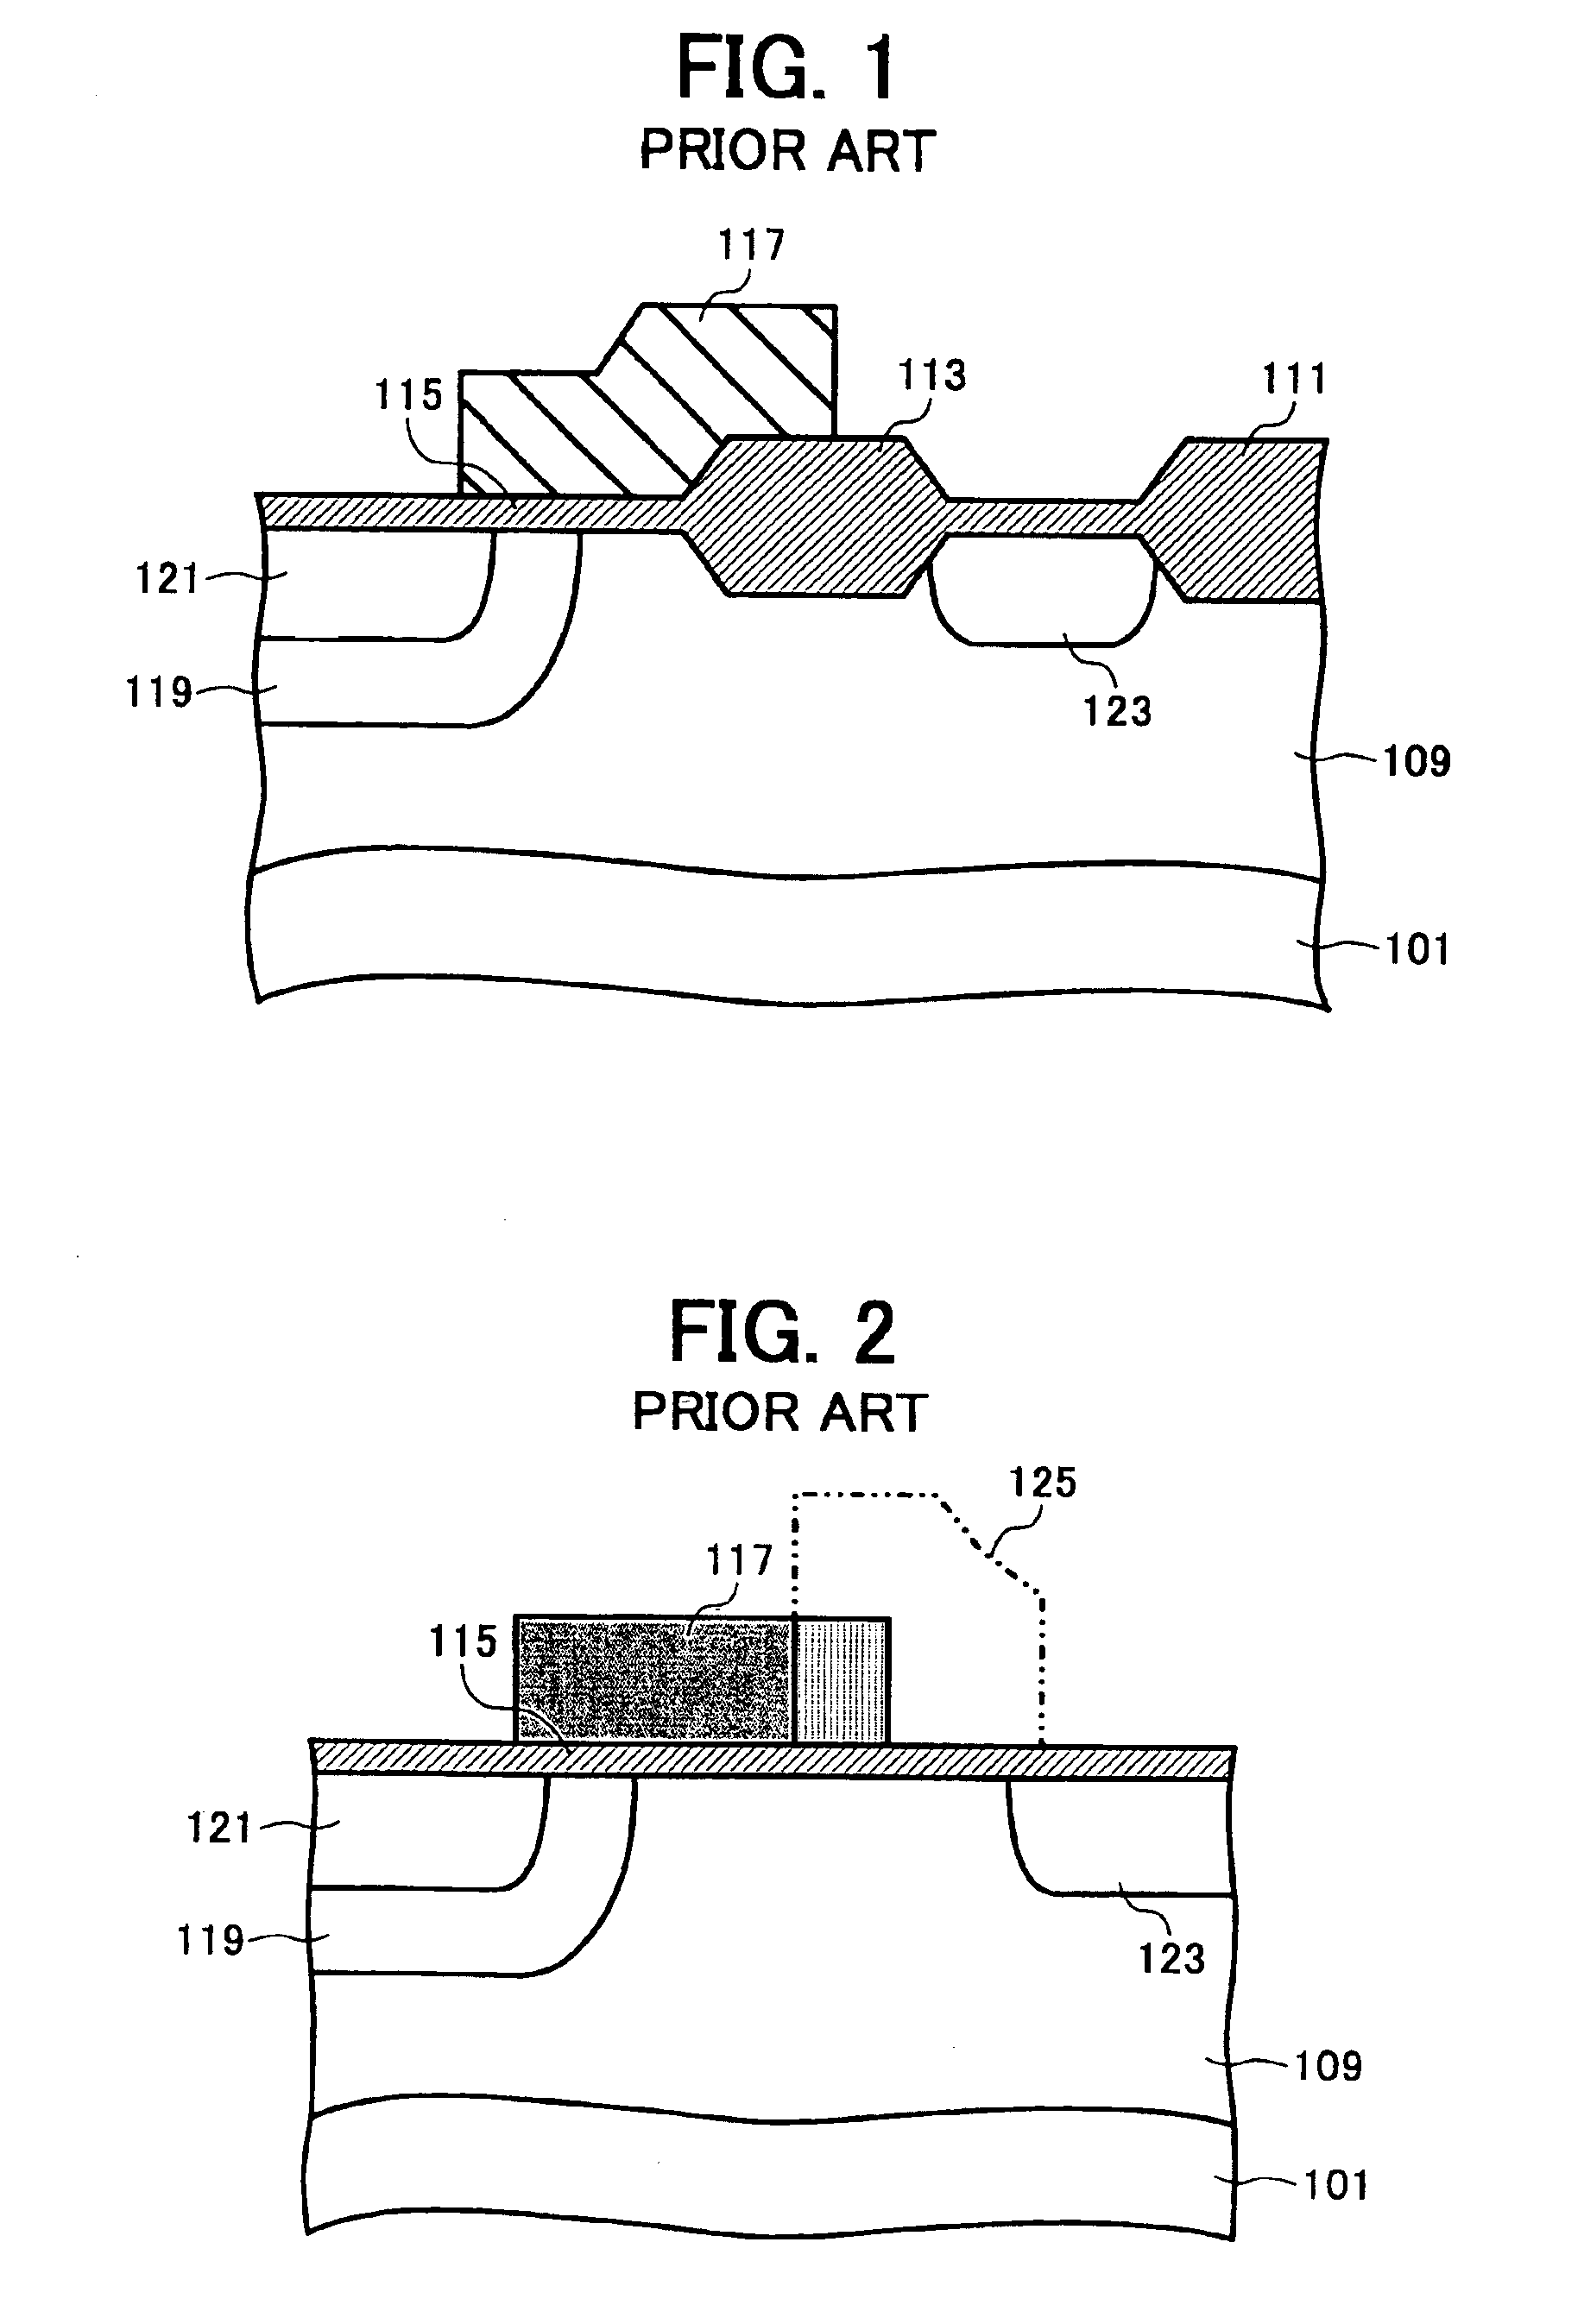 LDMOS transistor capable of attaining high withstand voltage with low on-resistance and having a structure suitable for incorporation with other MOS transistors